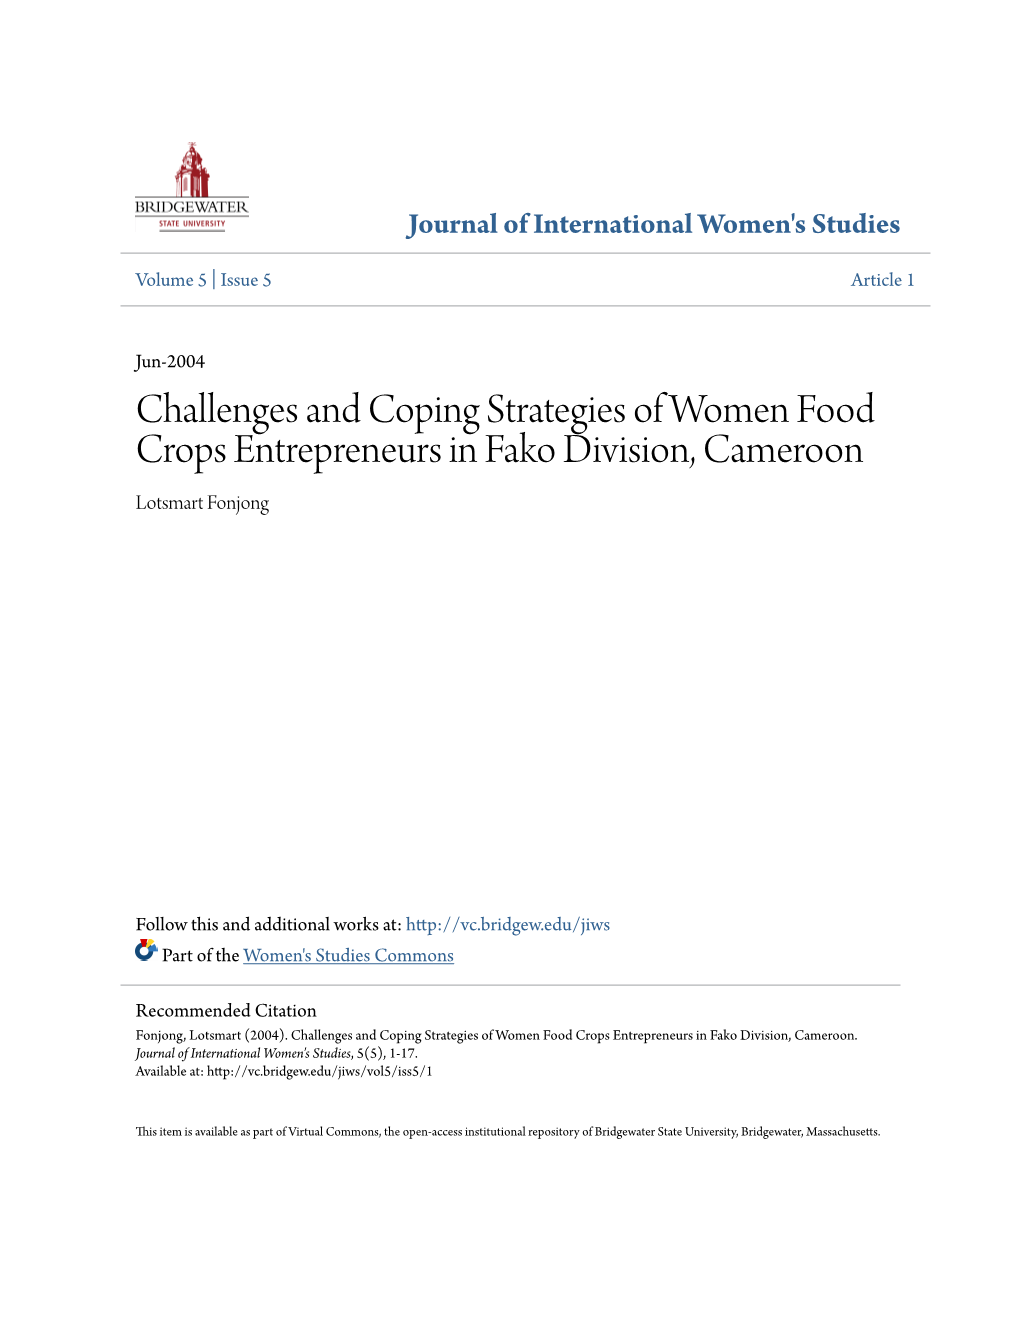 Challenges and Coping Strategies of Women Food Crops Entrepreneurs in Fako Division, Cameroon Lotsmart Fonjong